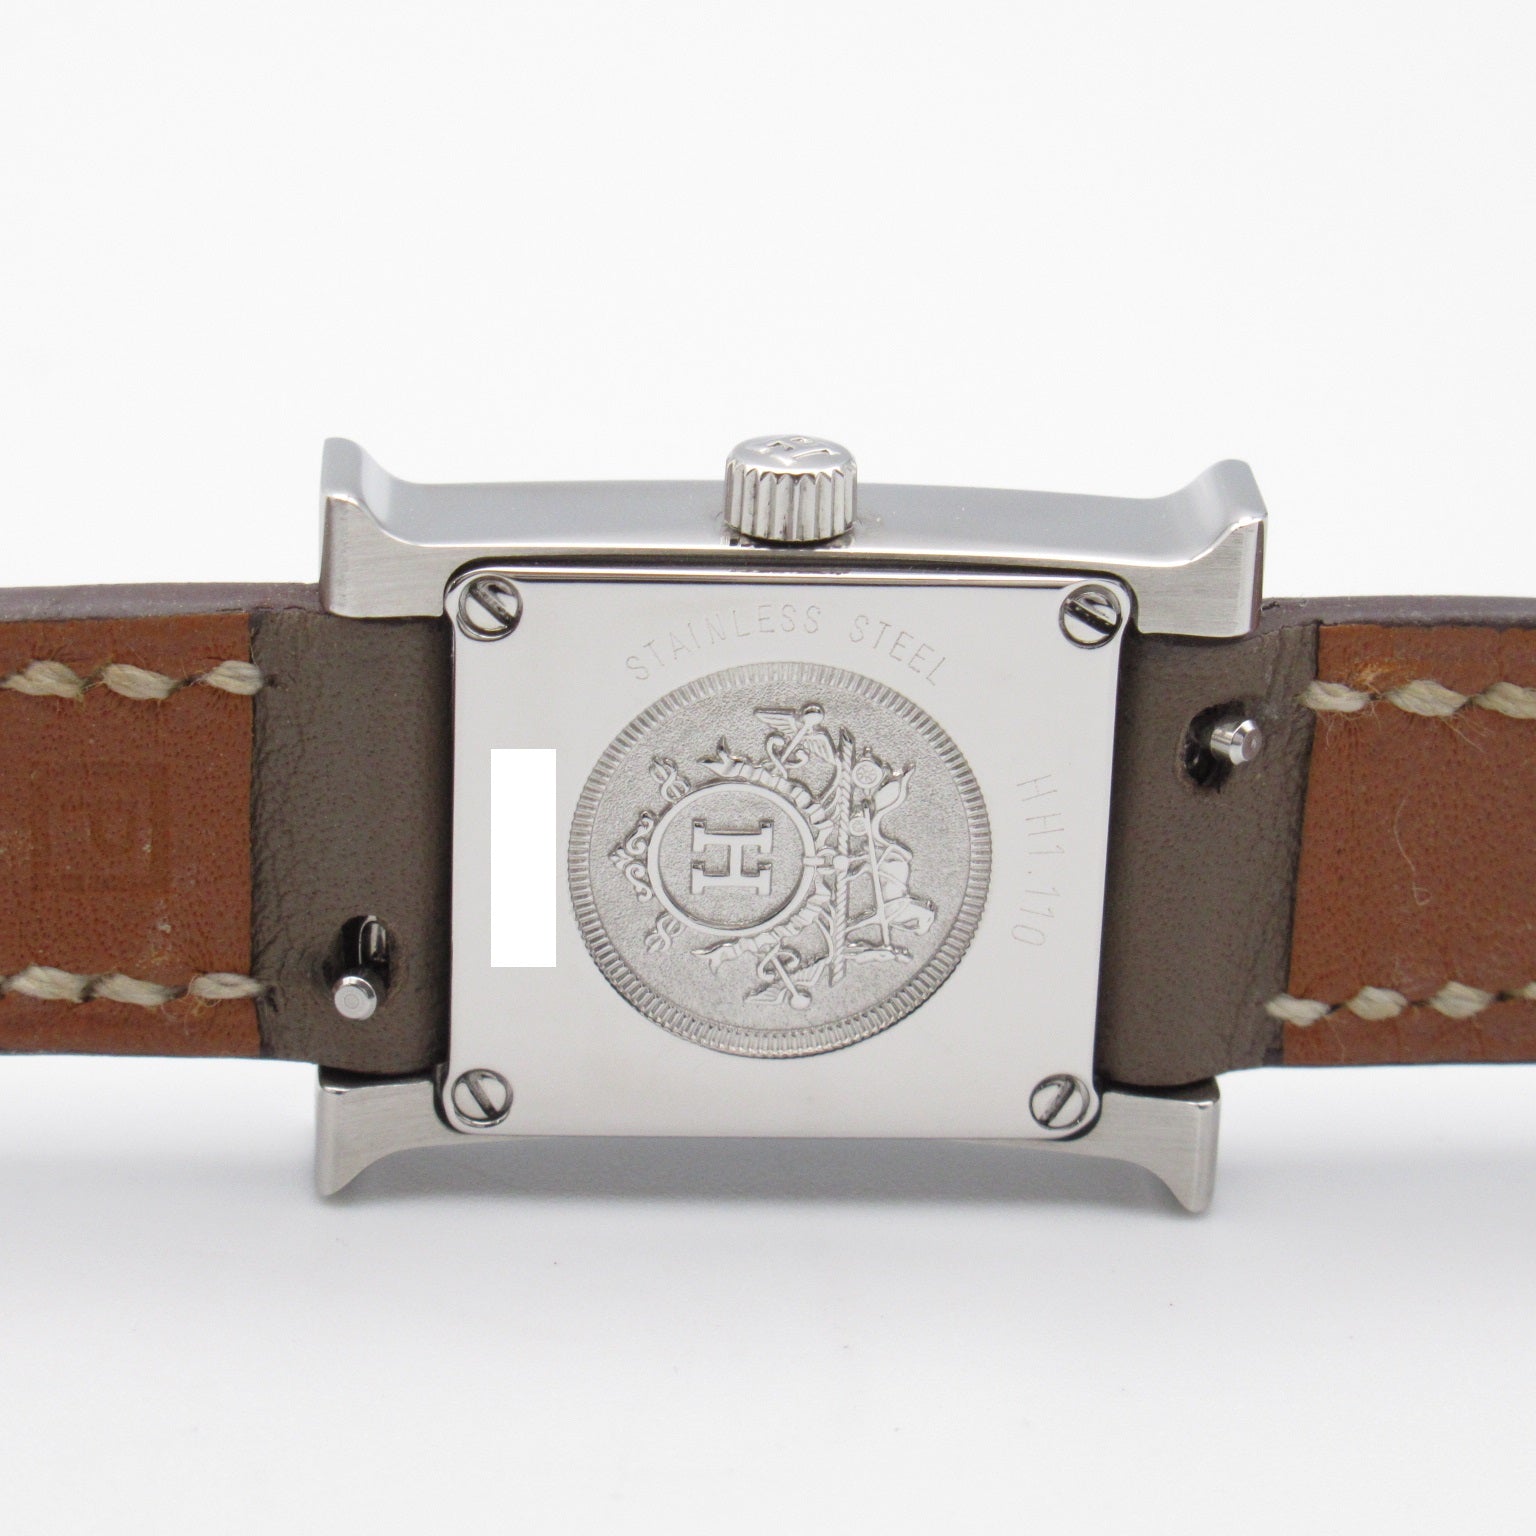 Hermes Hermes H Watch Watch Watch Stainless Steel Leather Belt  White/Silver HH1.110